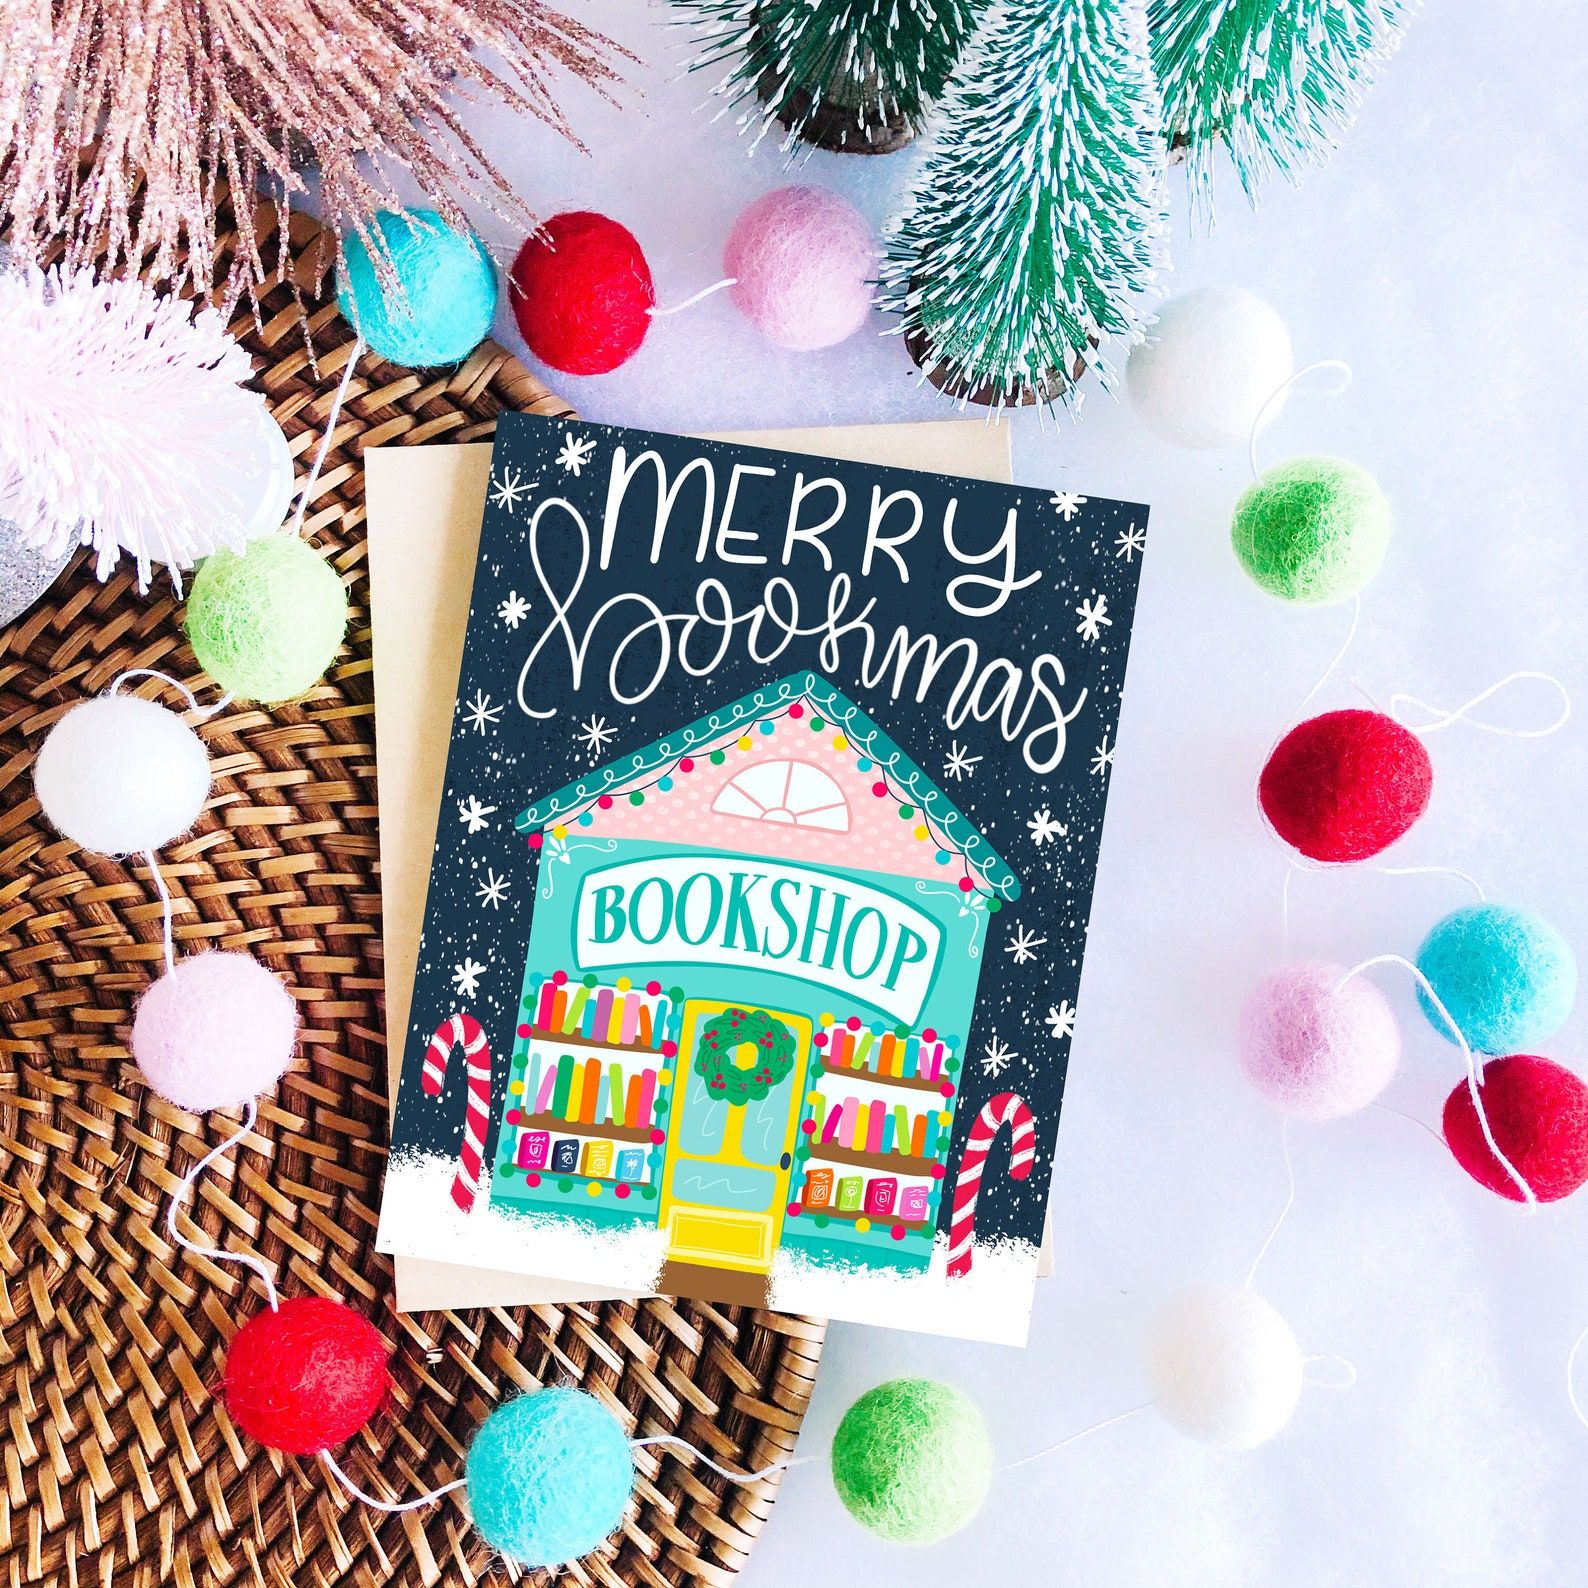 A dark blue card that reads "Merry Bookmas" and depicts a teal bookshop with colorful books pines and pink, red, and green accents.